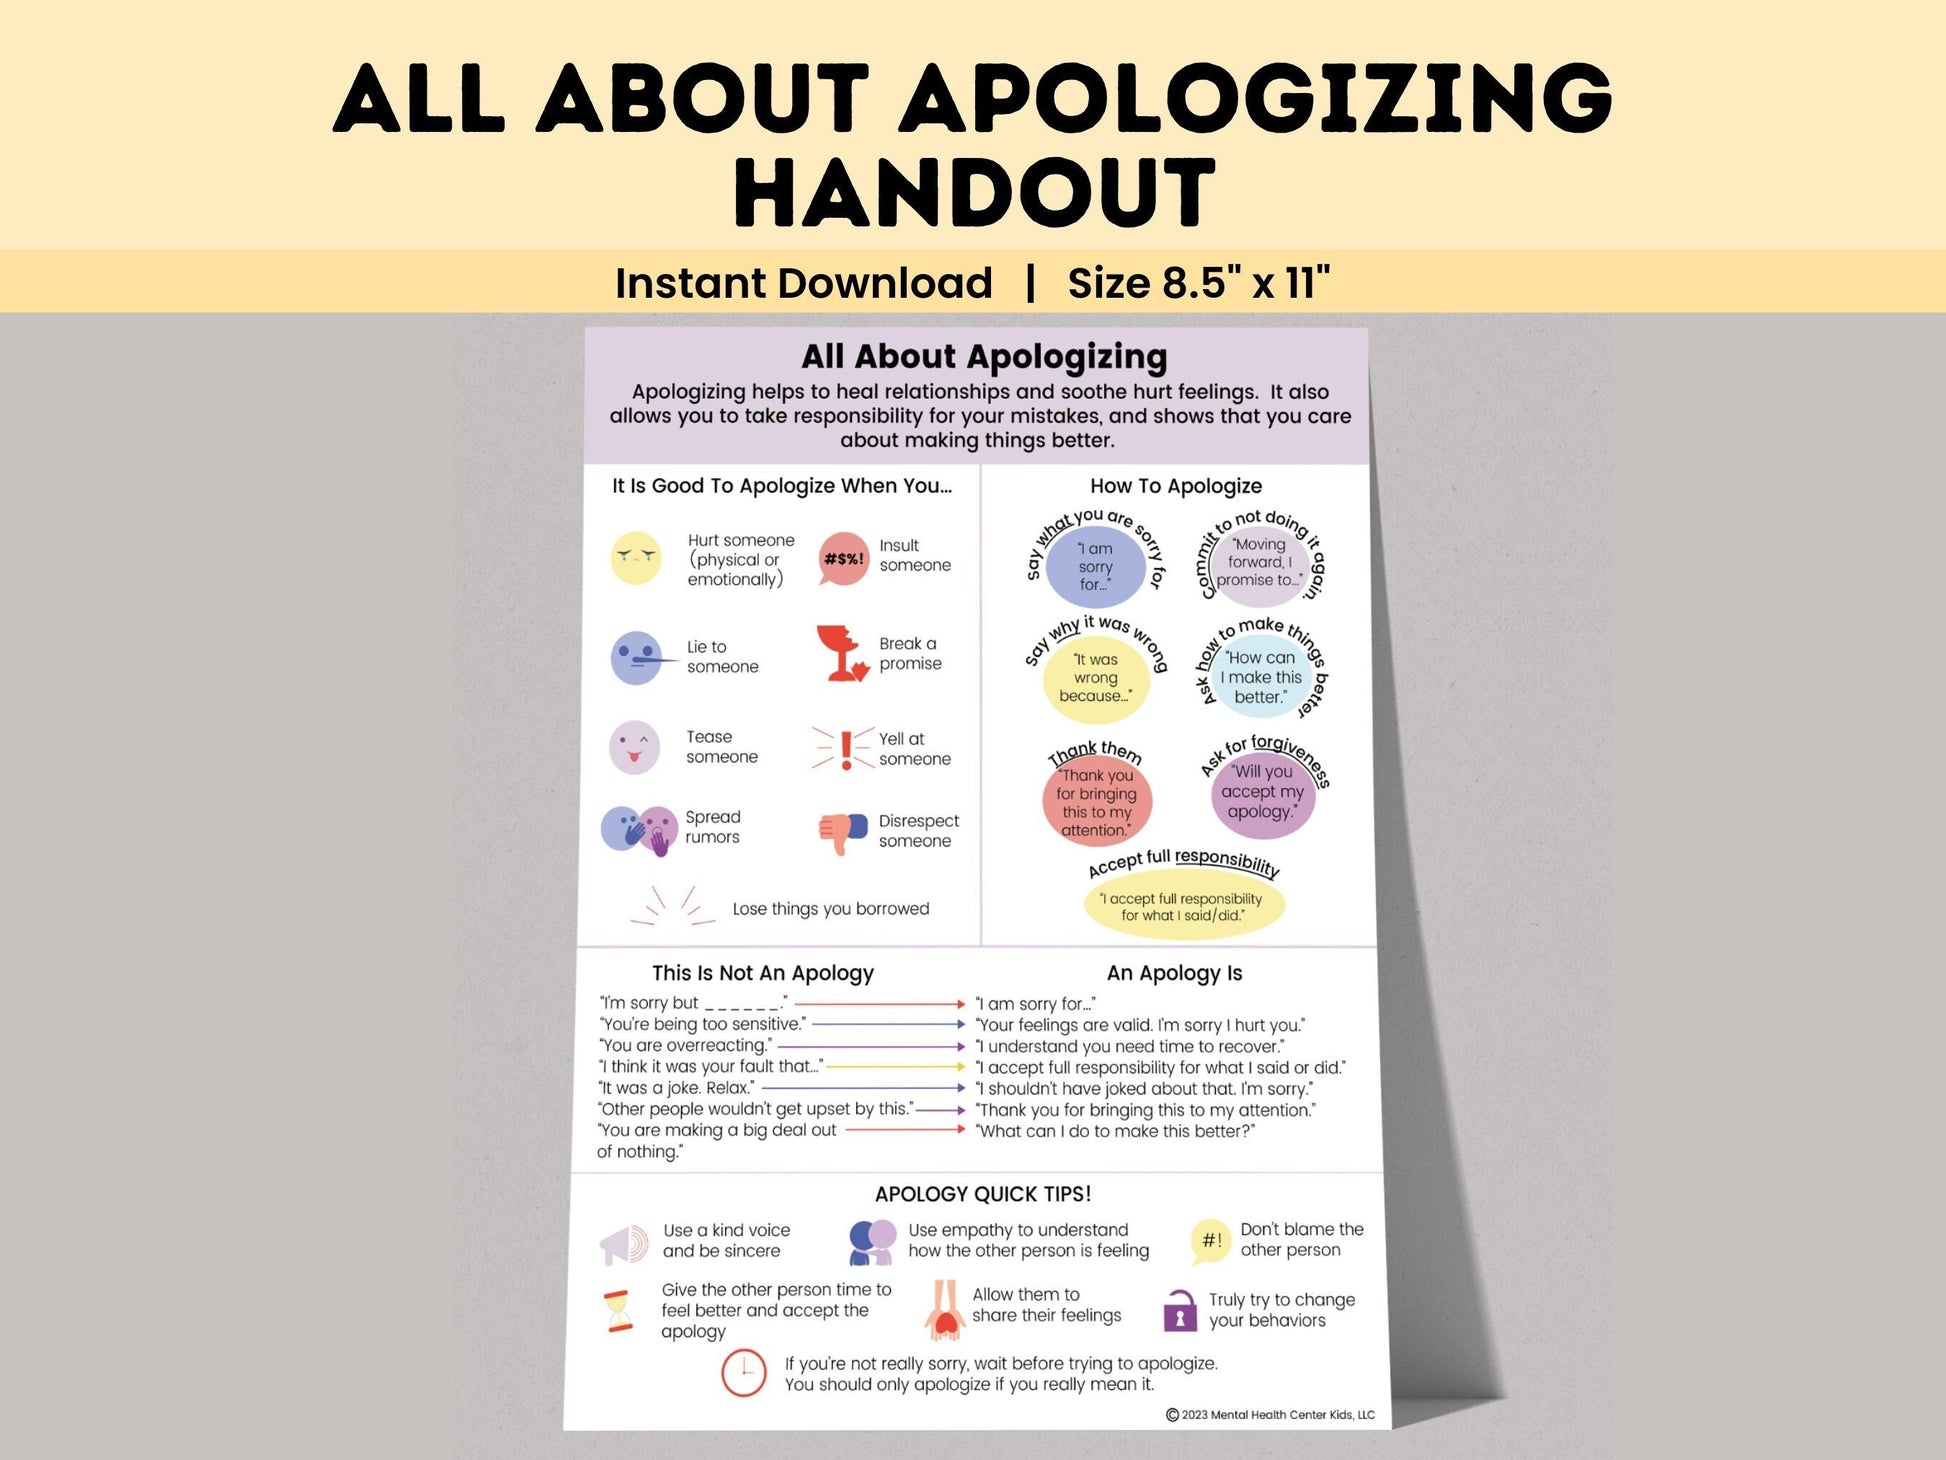 All About Apologizing